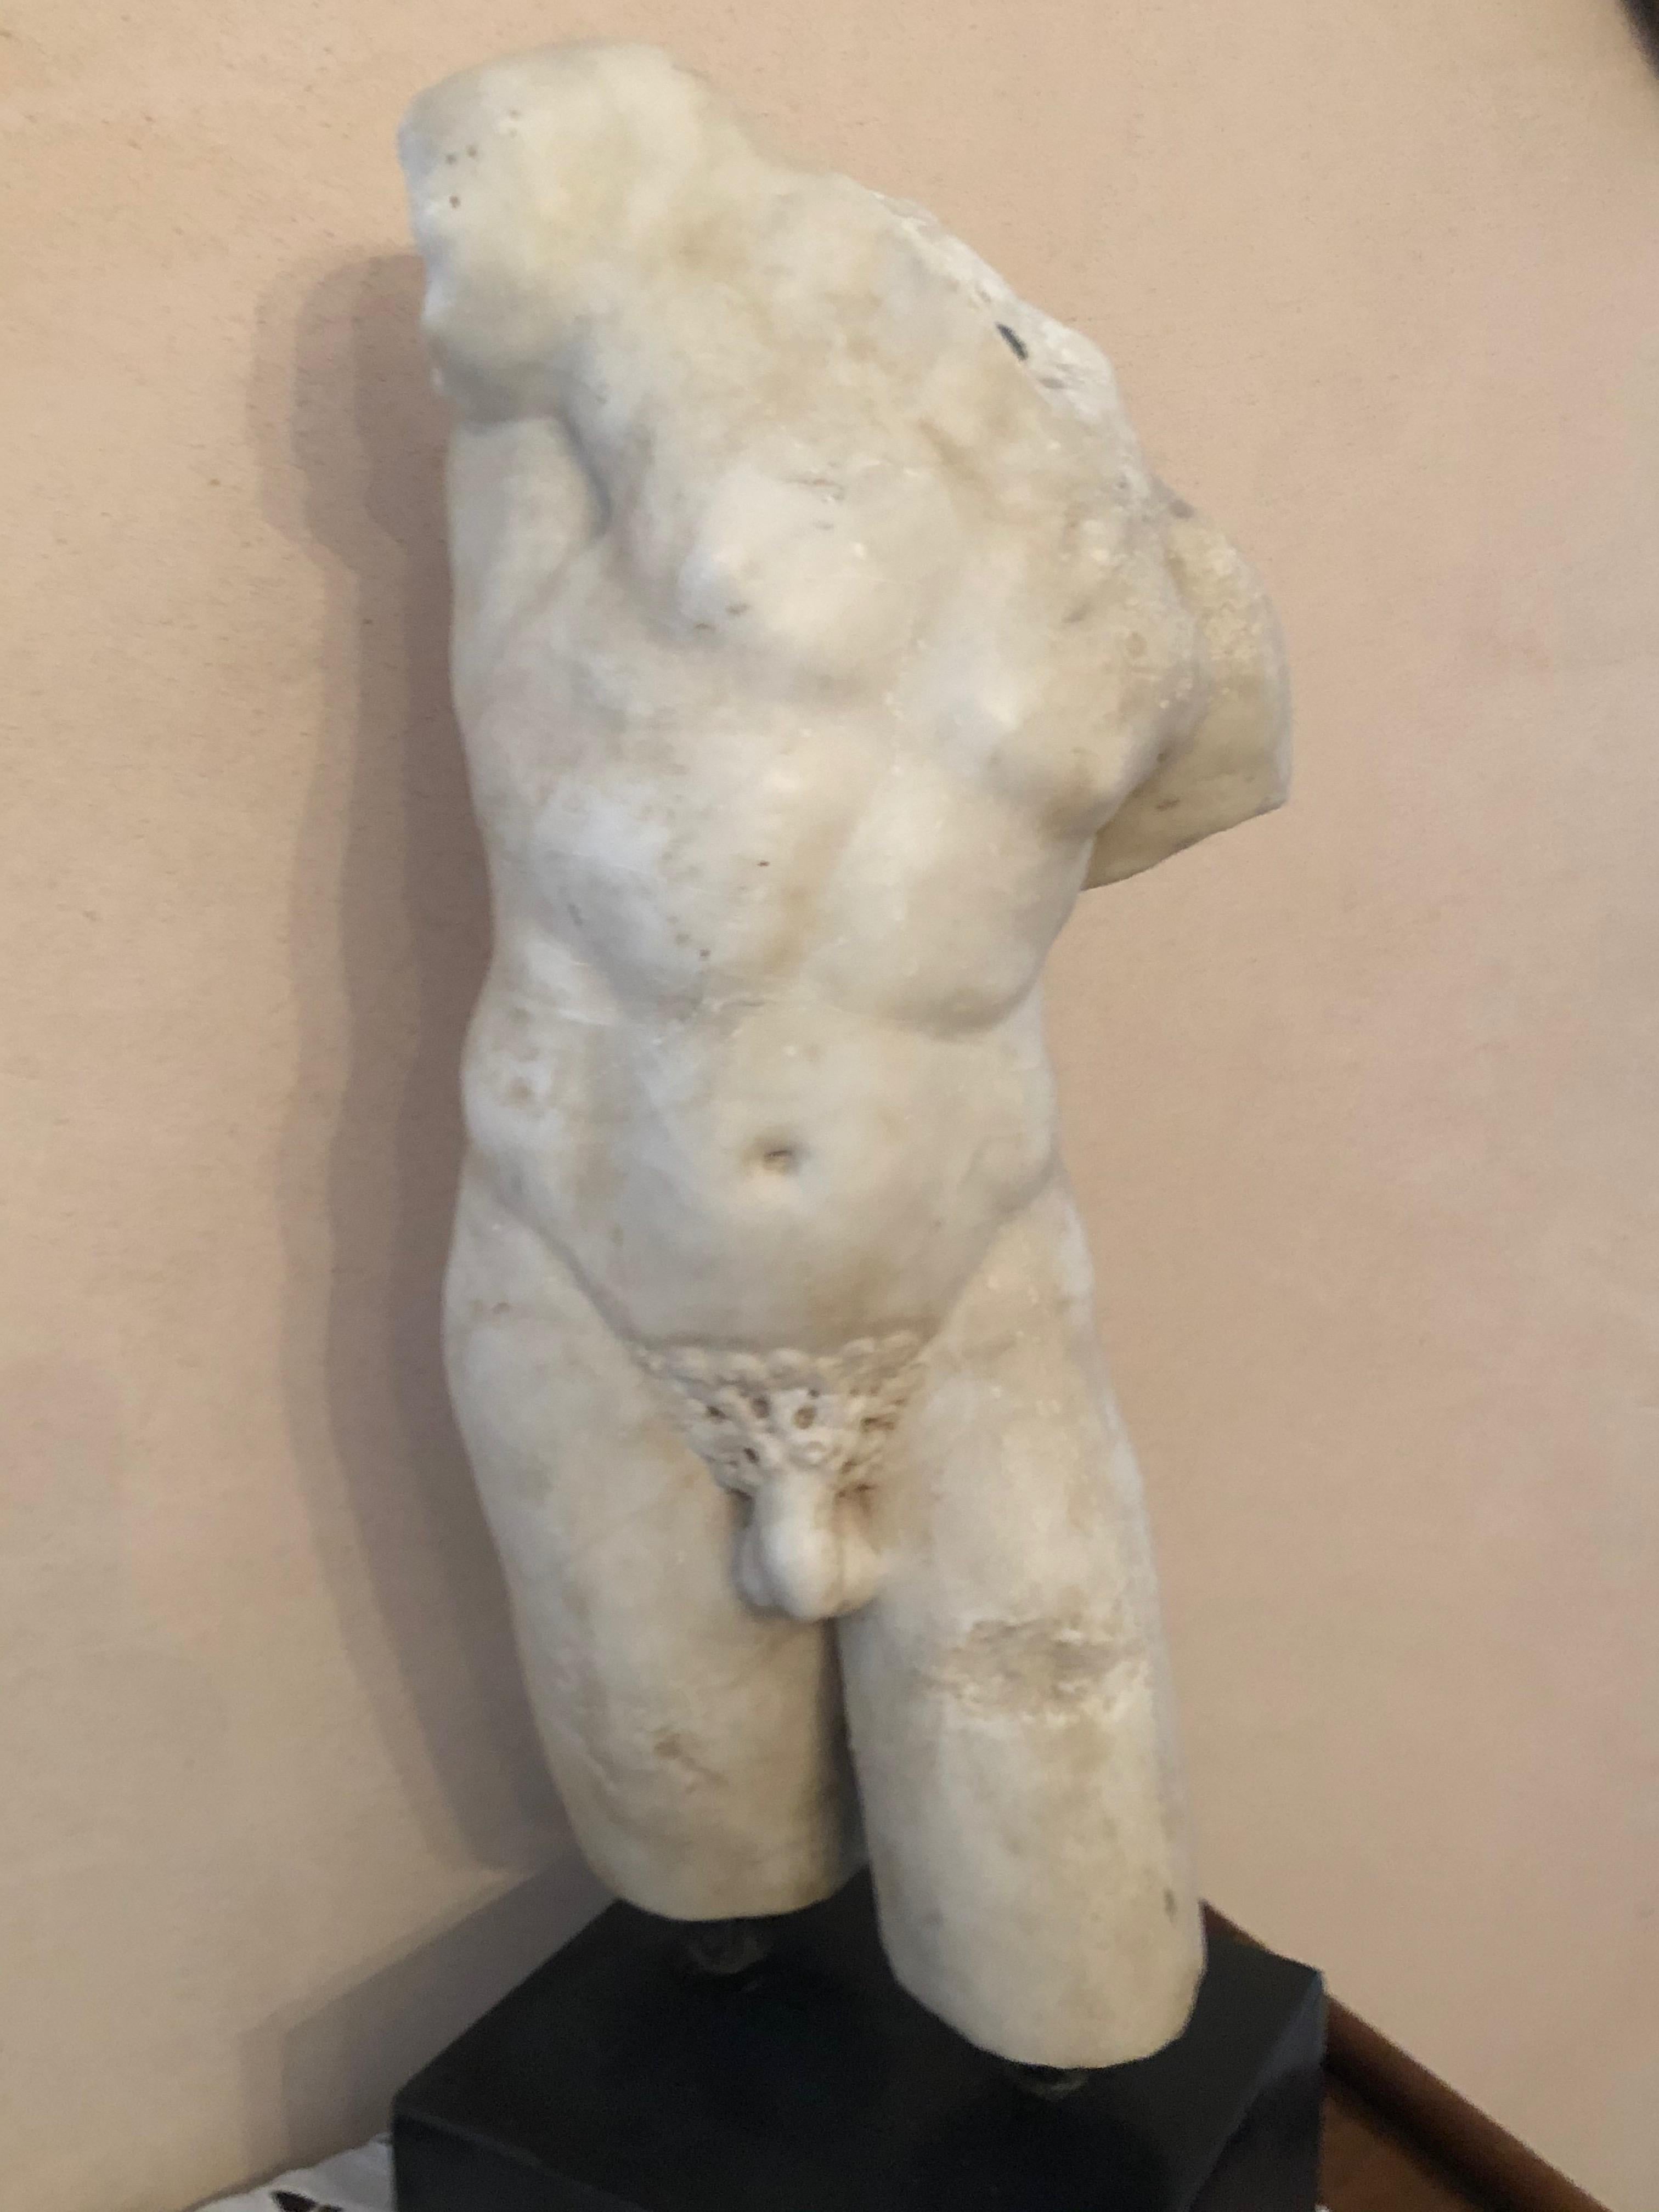 Beautiful marble torso in Pariox marble. Really high quality work. Beautiful movement and torsion of the torso. The details are really well defined.
The torso has been laid on a black marquise marble base.
measures H 55.